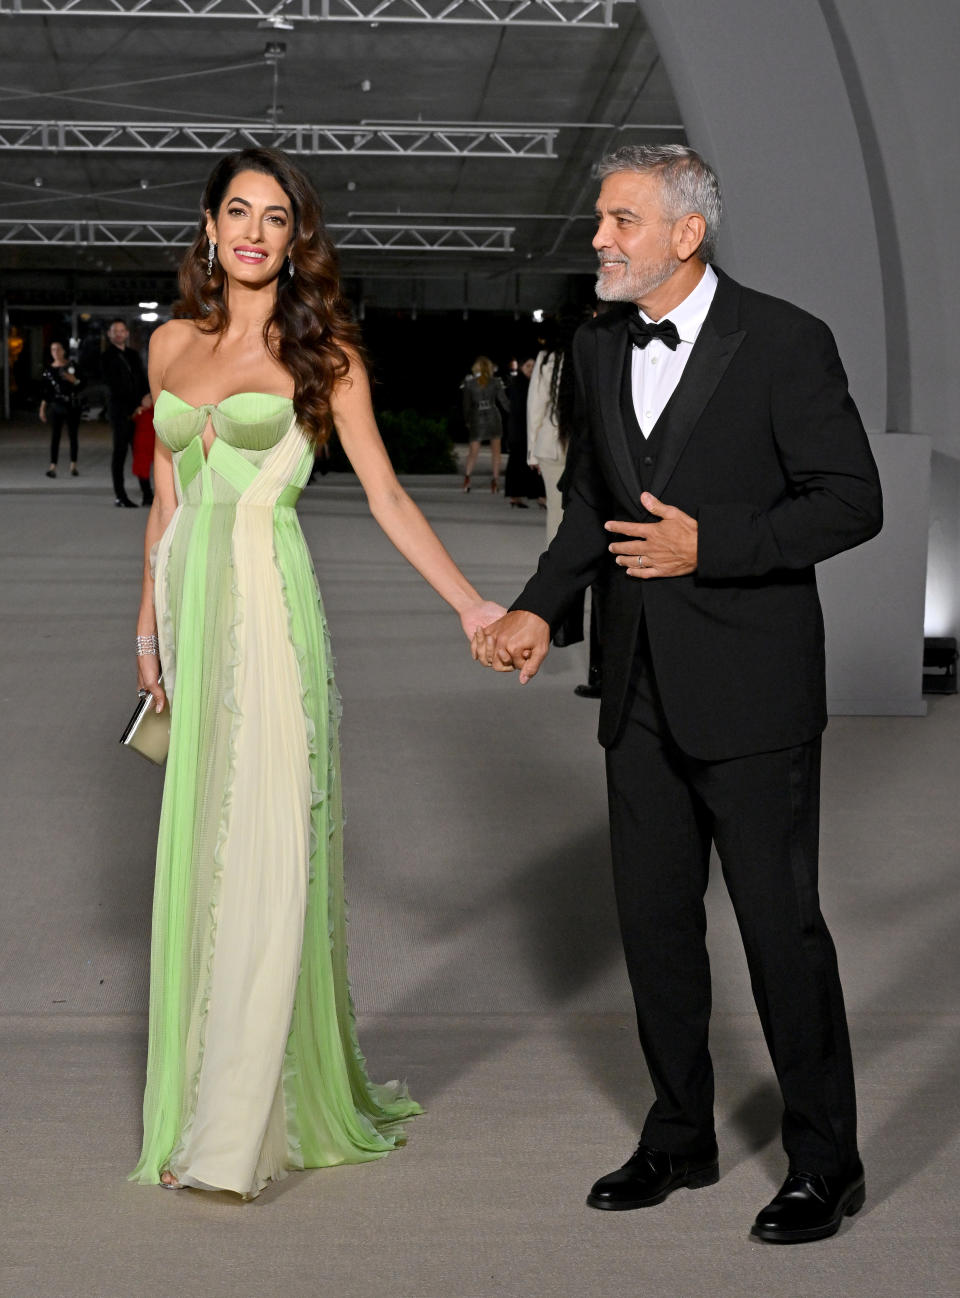 Amal Clooney and George Clooney attend the 2nd Annual Academy Museum Gala at Academy Museum of Motion Pictures. (Getty Images)